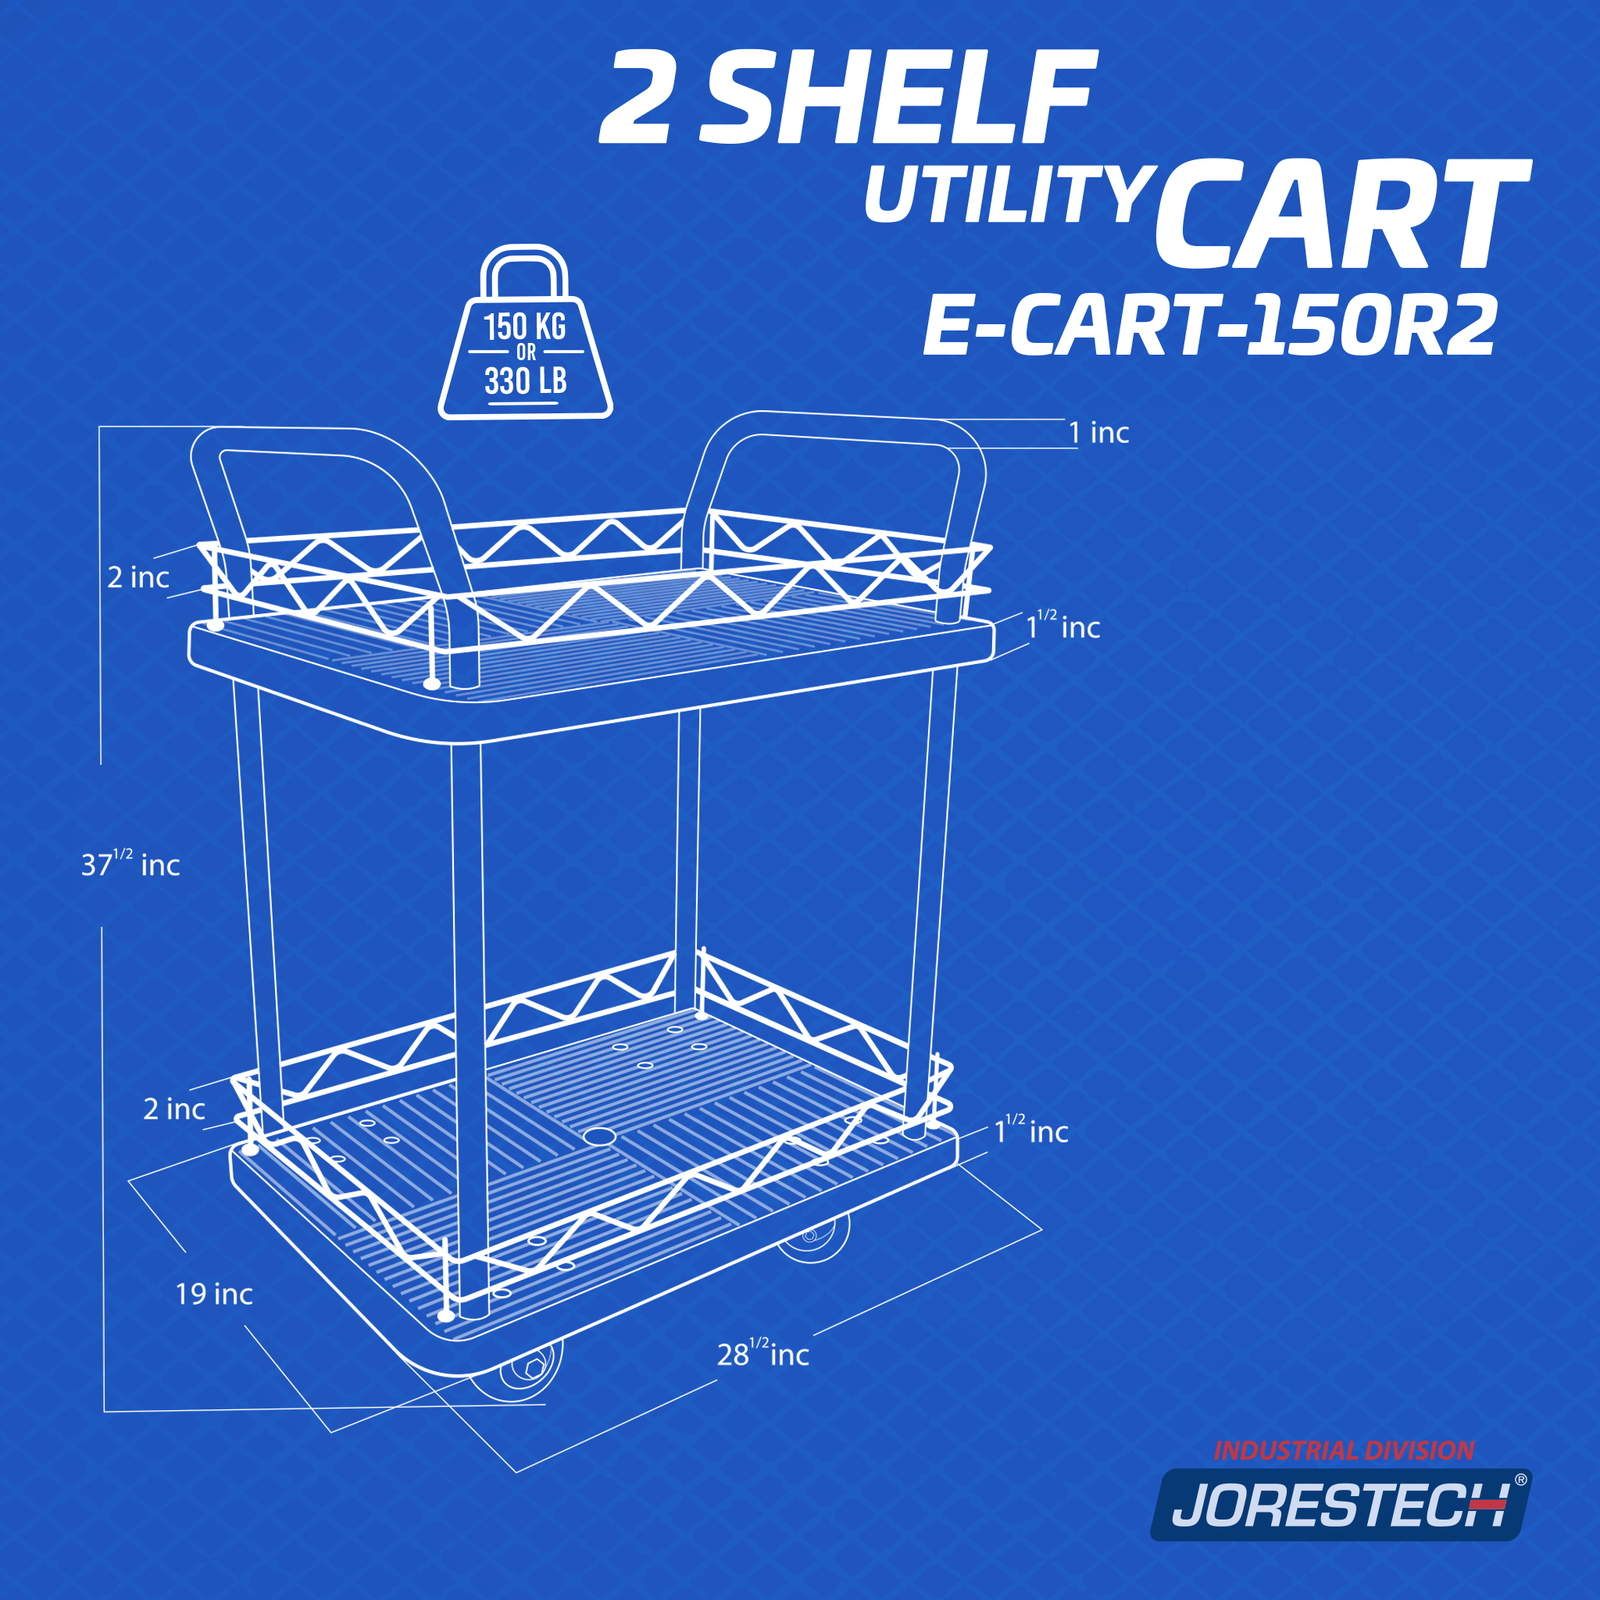 Graphic of the JORES TECHNOLOGIES® 2 shelf utility cart showing the max weight the cart can handle which is 150Kg or 330Lbs and  the measurements of the platforms of the dolly cart